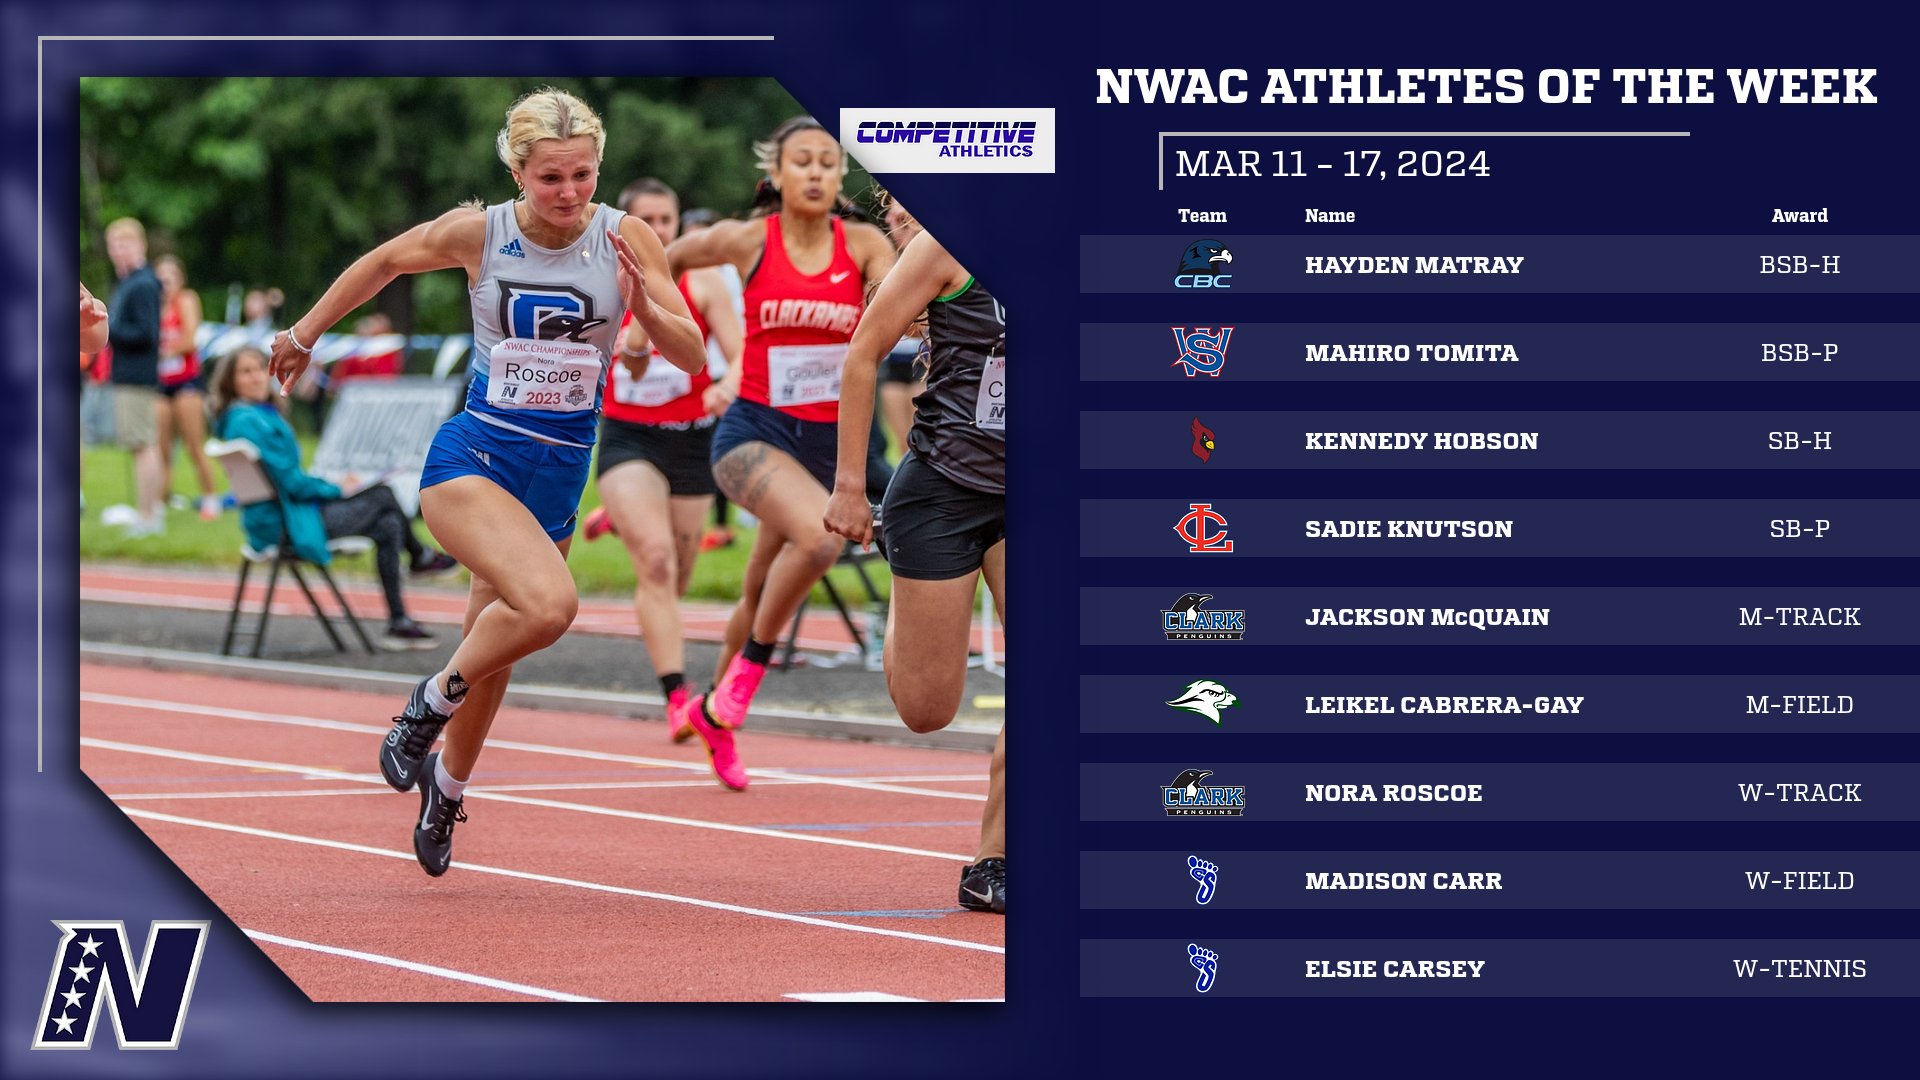 Competitive Athletics NWAC Athletes of the Week: March 11-17